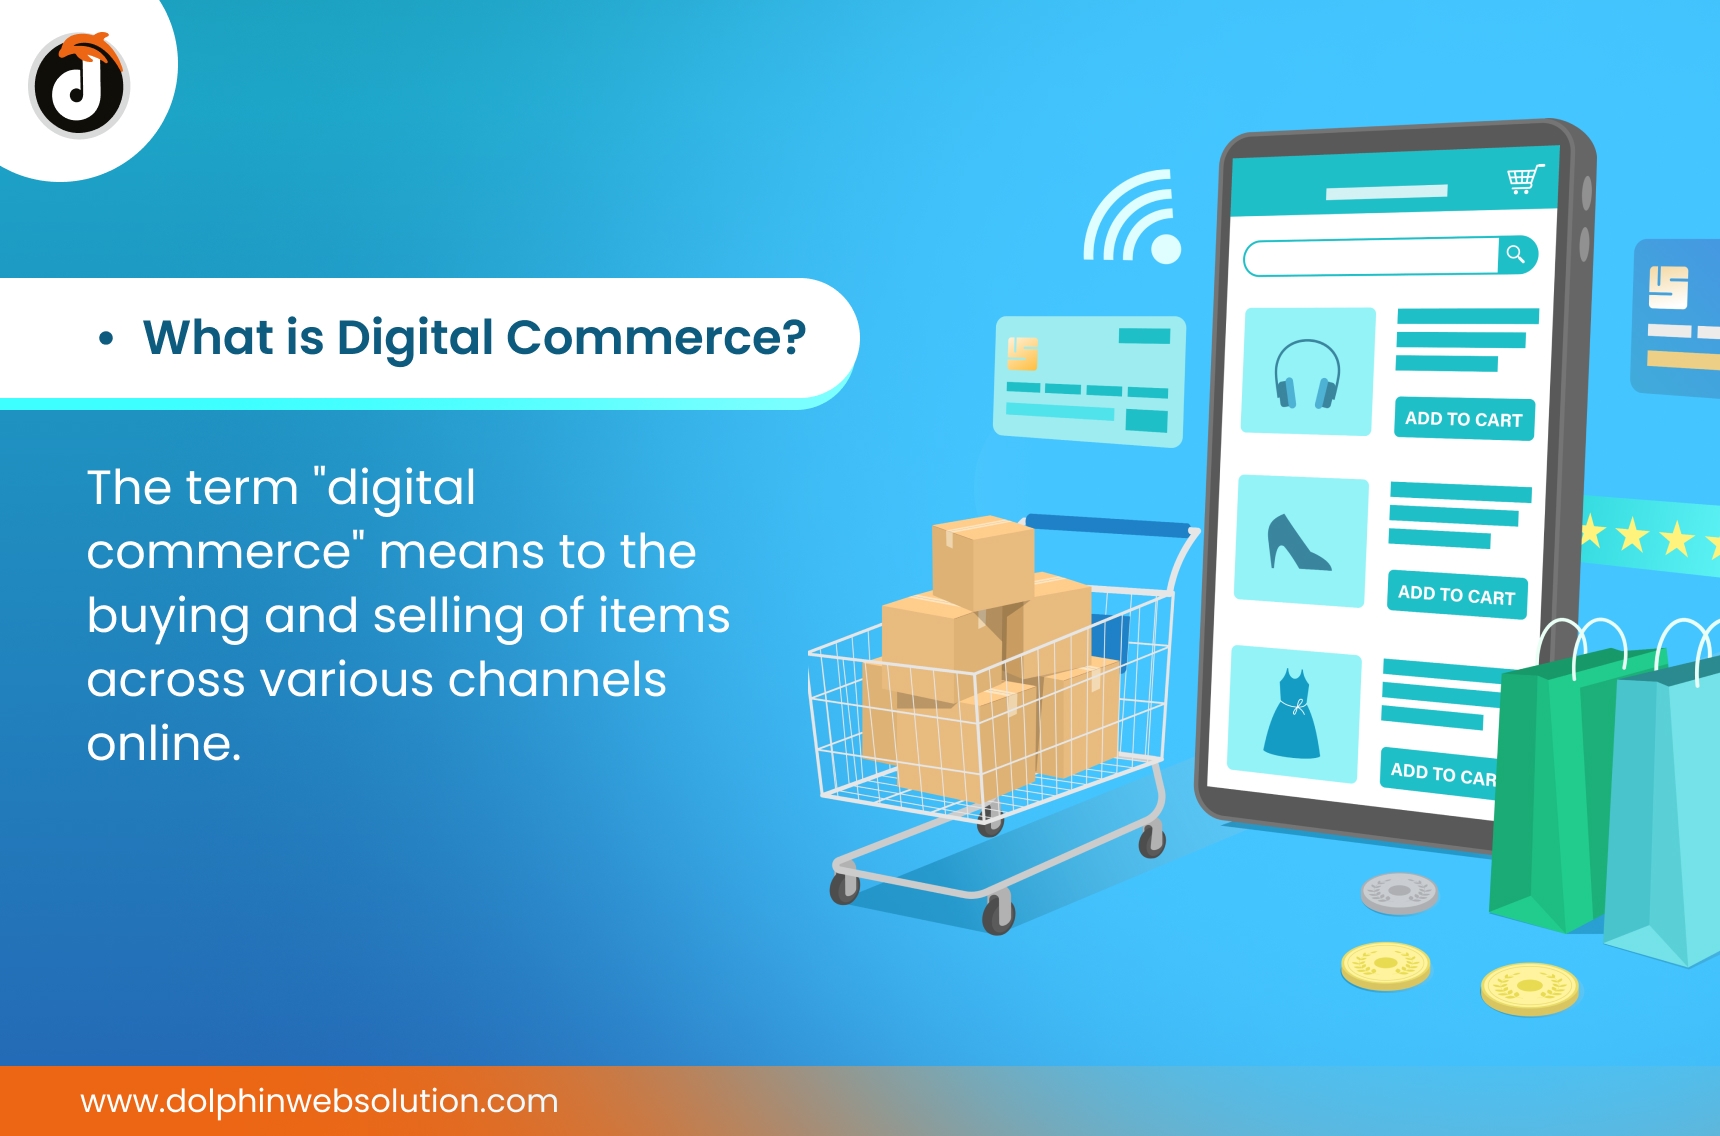 What is Digital Commerce